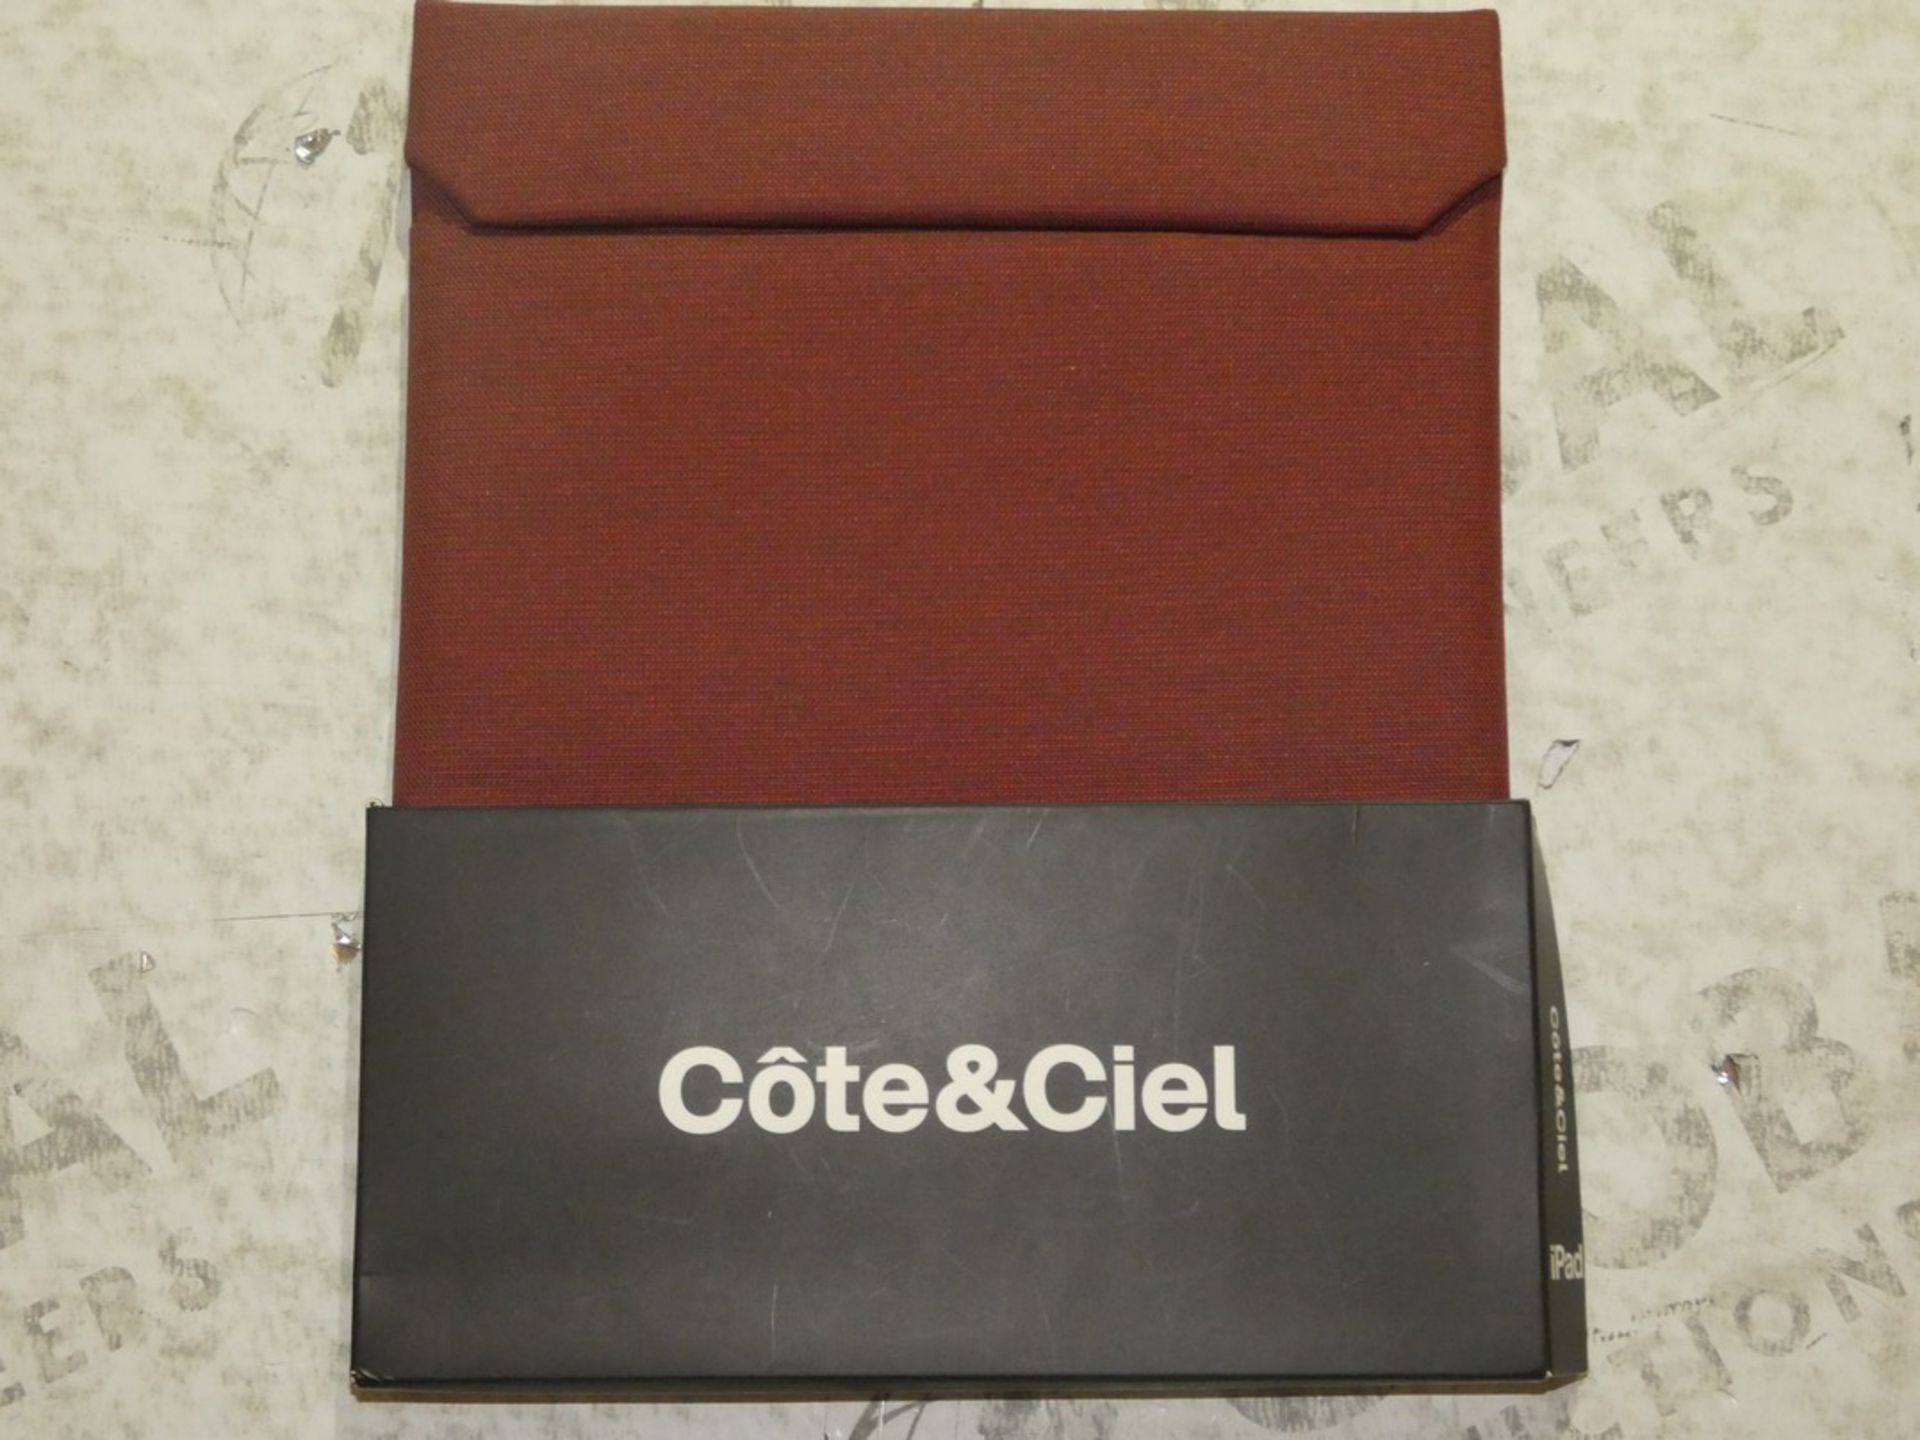 Boxed Brand New Cote and Ciel Red Fabric Ipad Pouches RRP £30 Each (107)